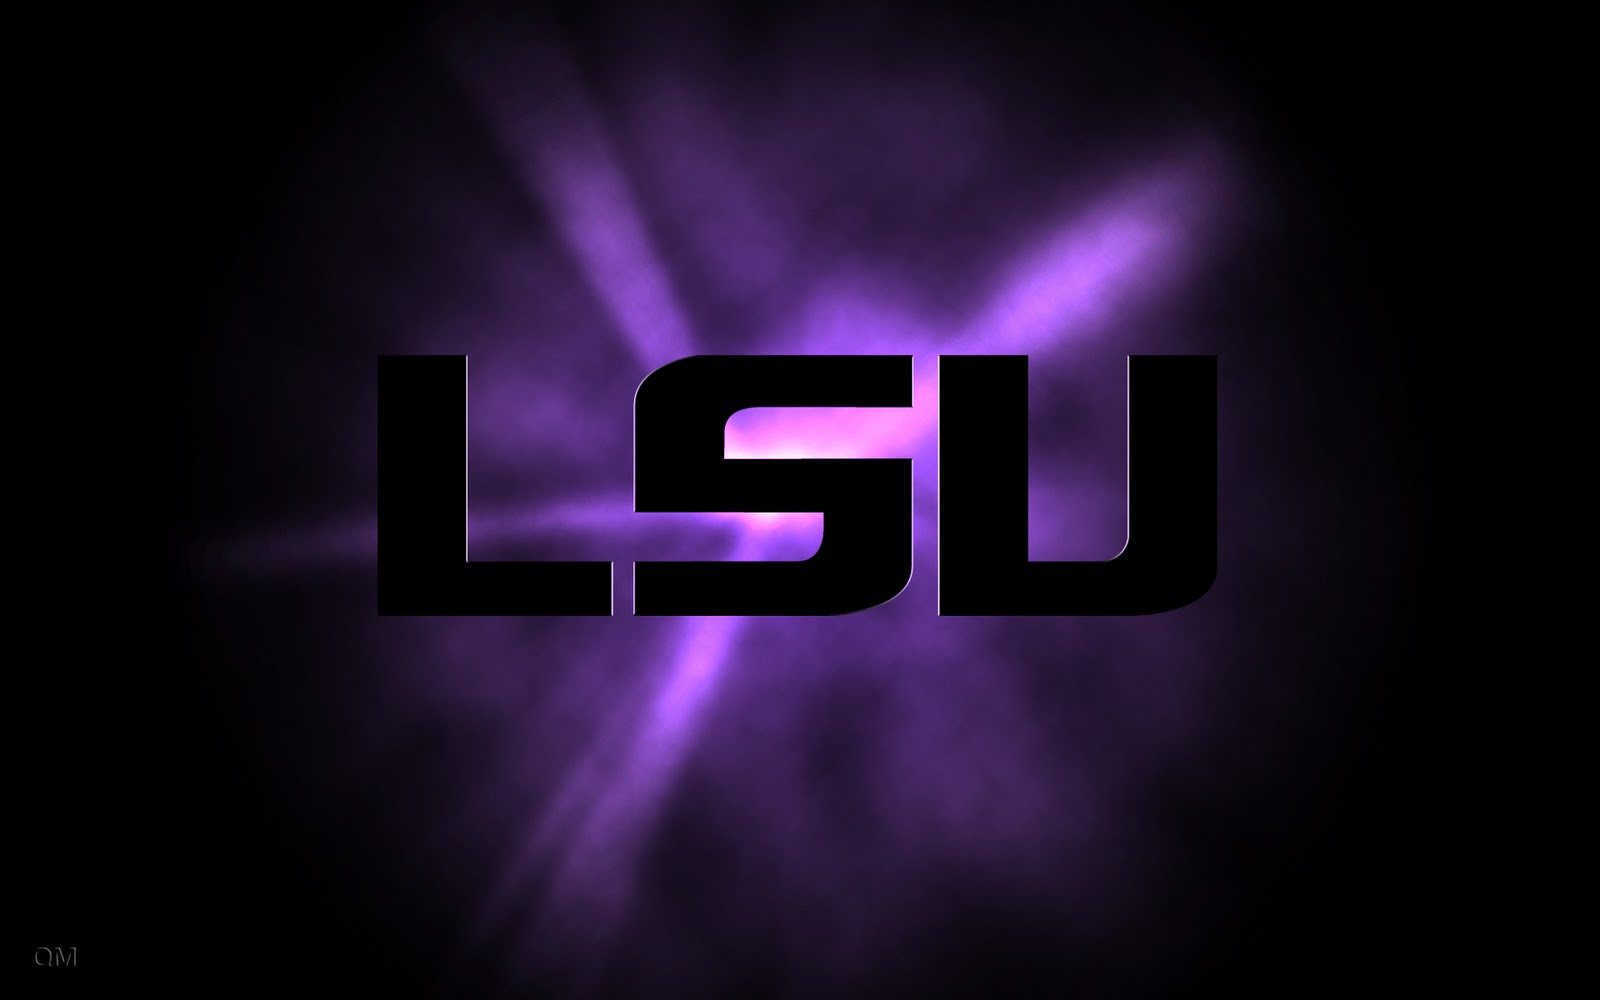 Lsu Android Wallpaper Image